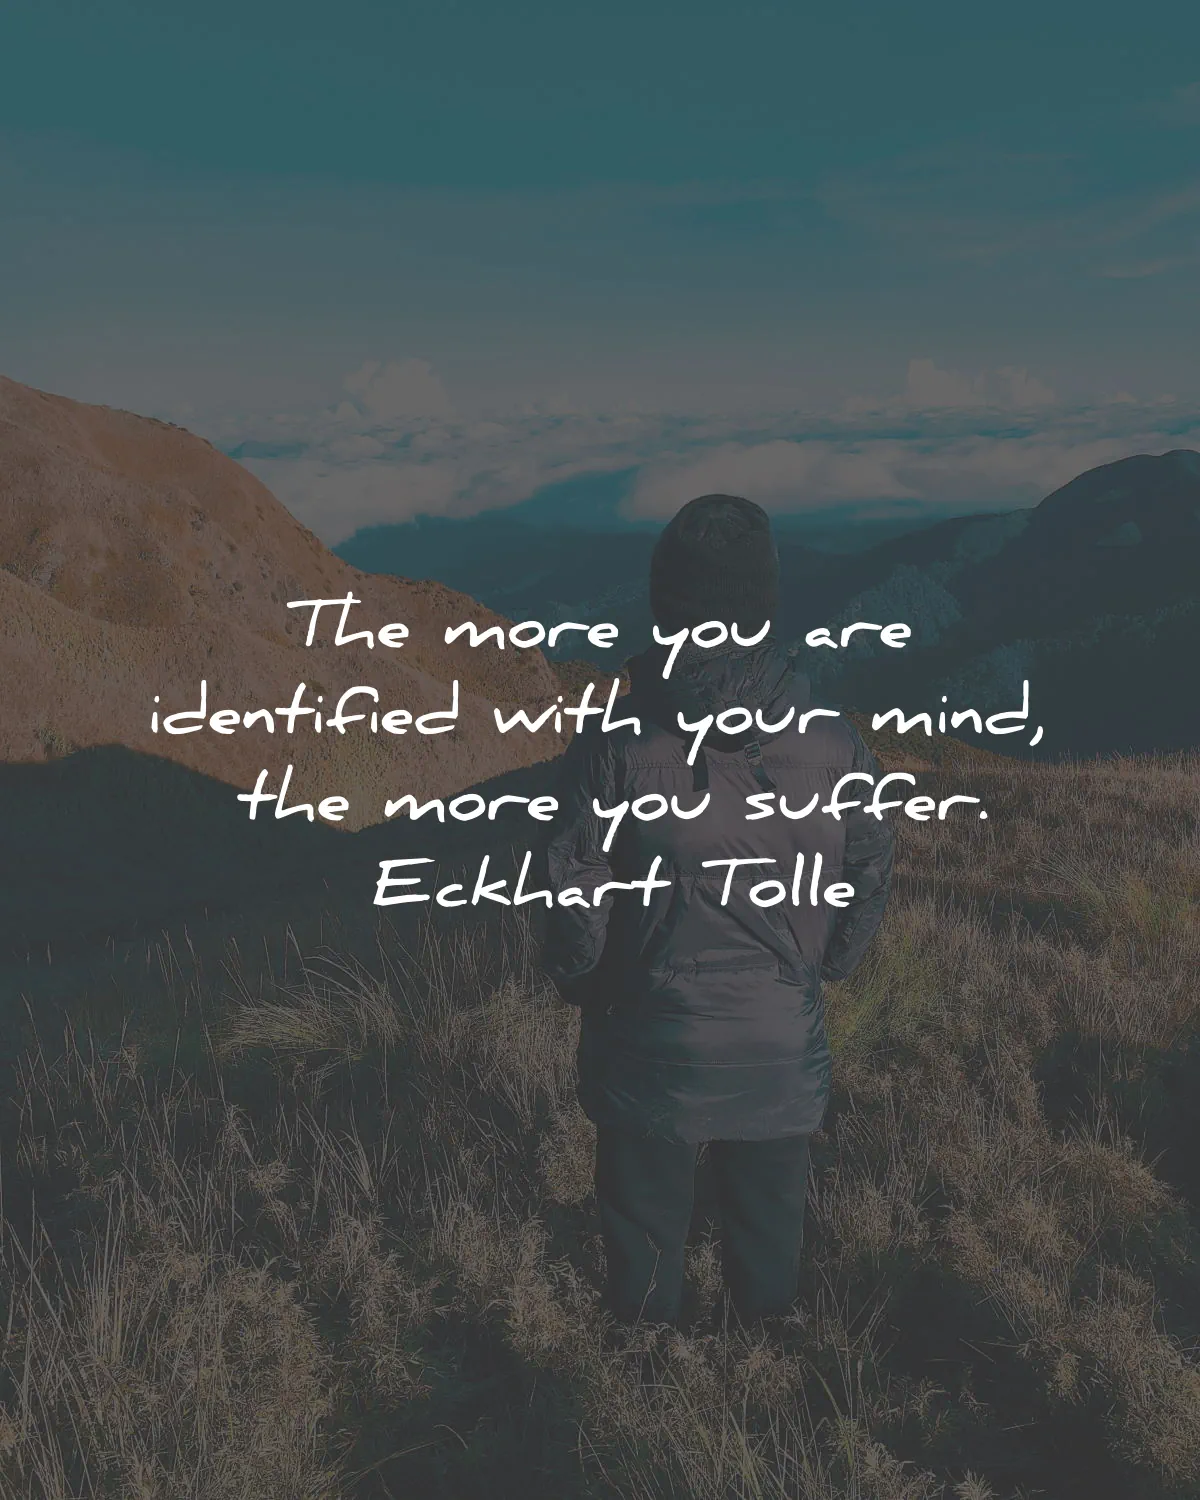 the power of now quotes summary eckhart tolle more identified mind suffer wisdom